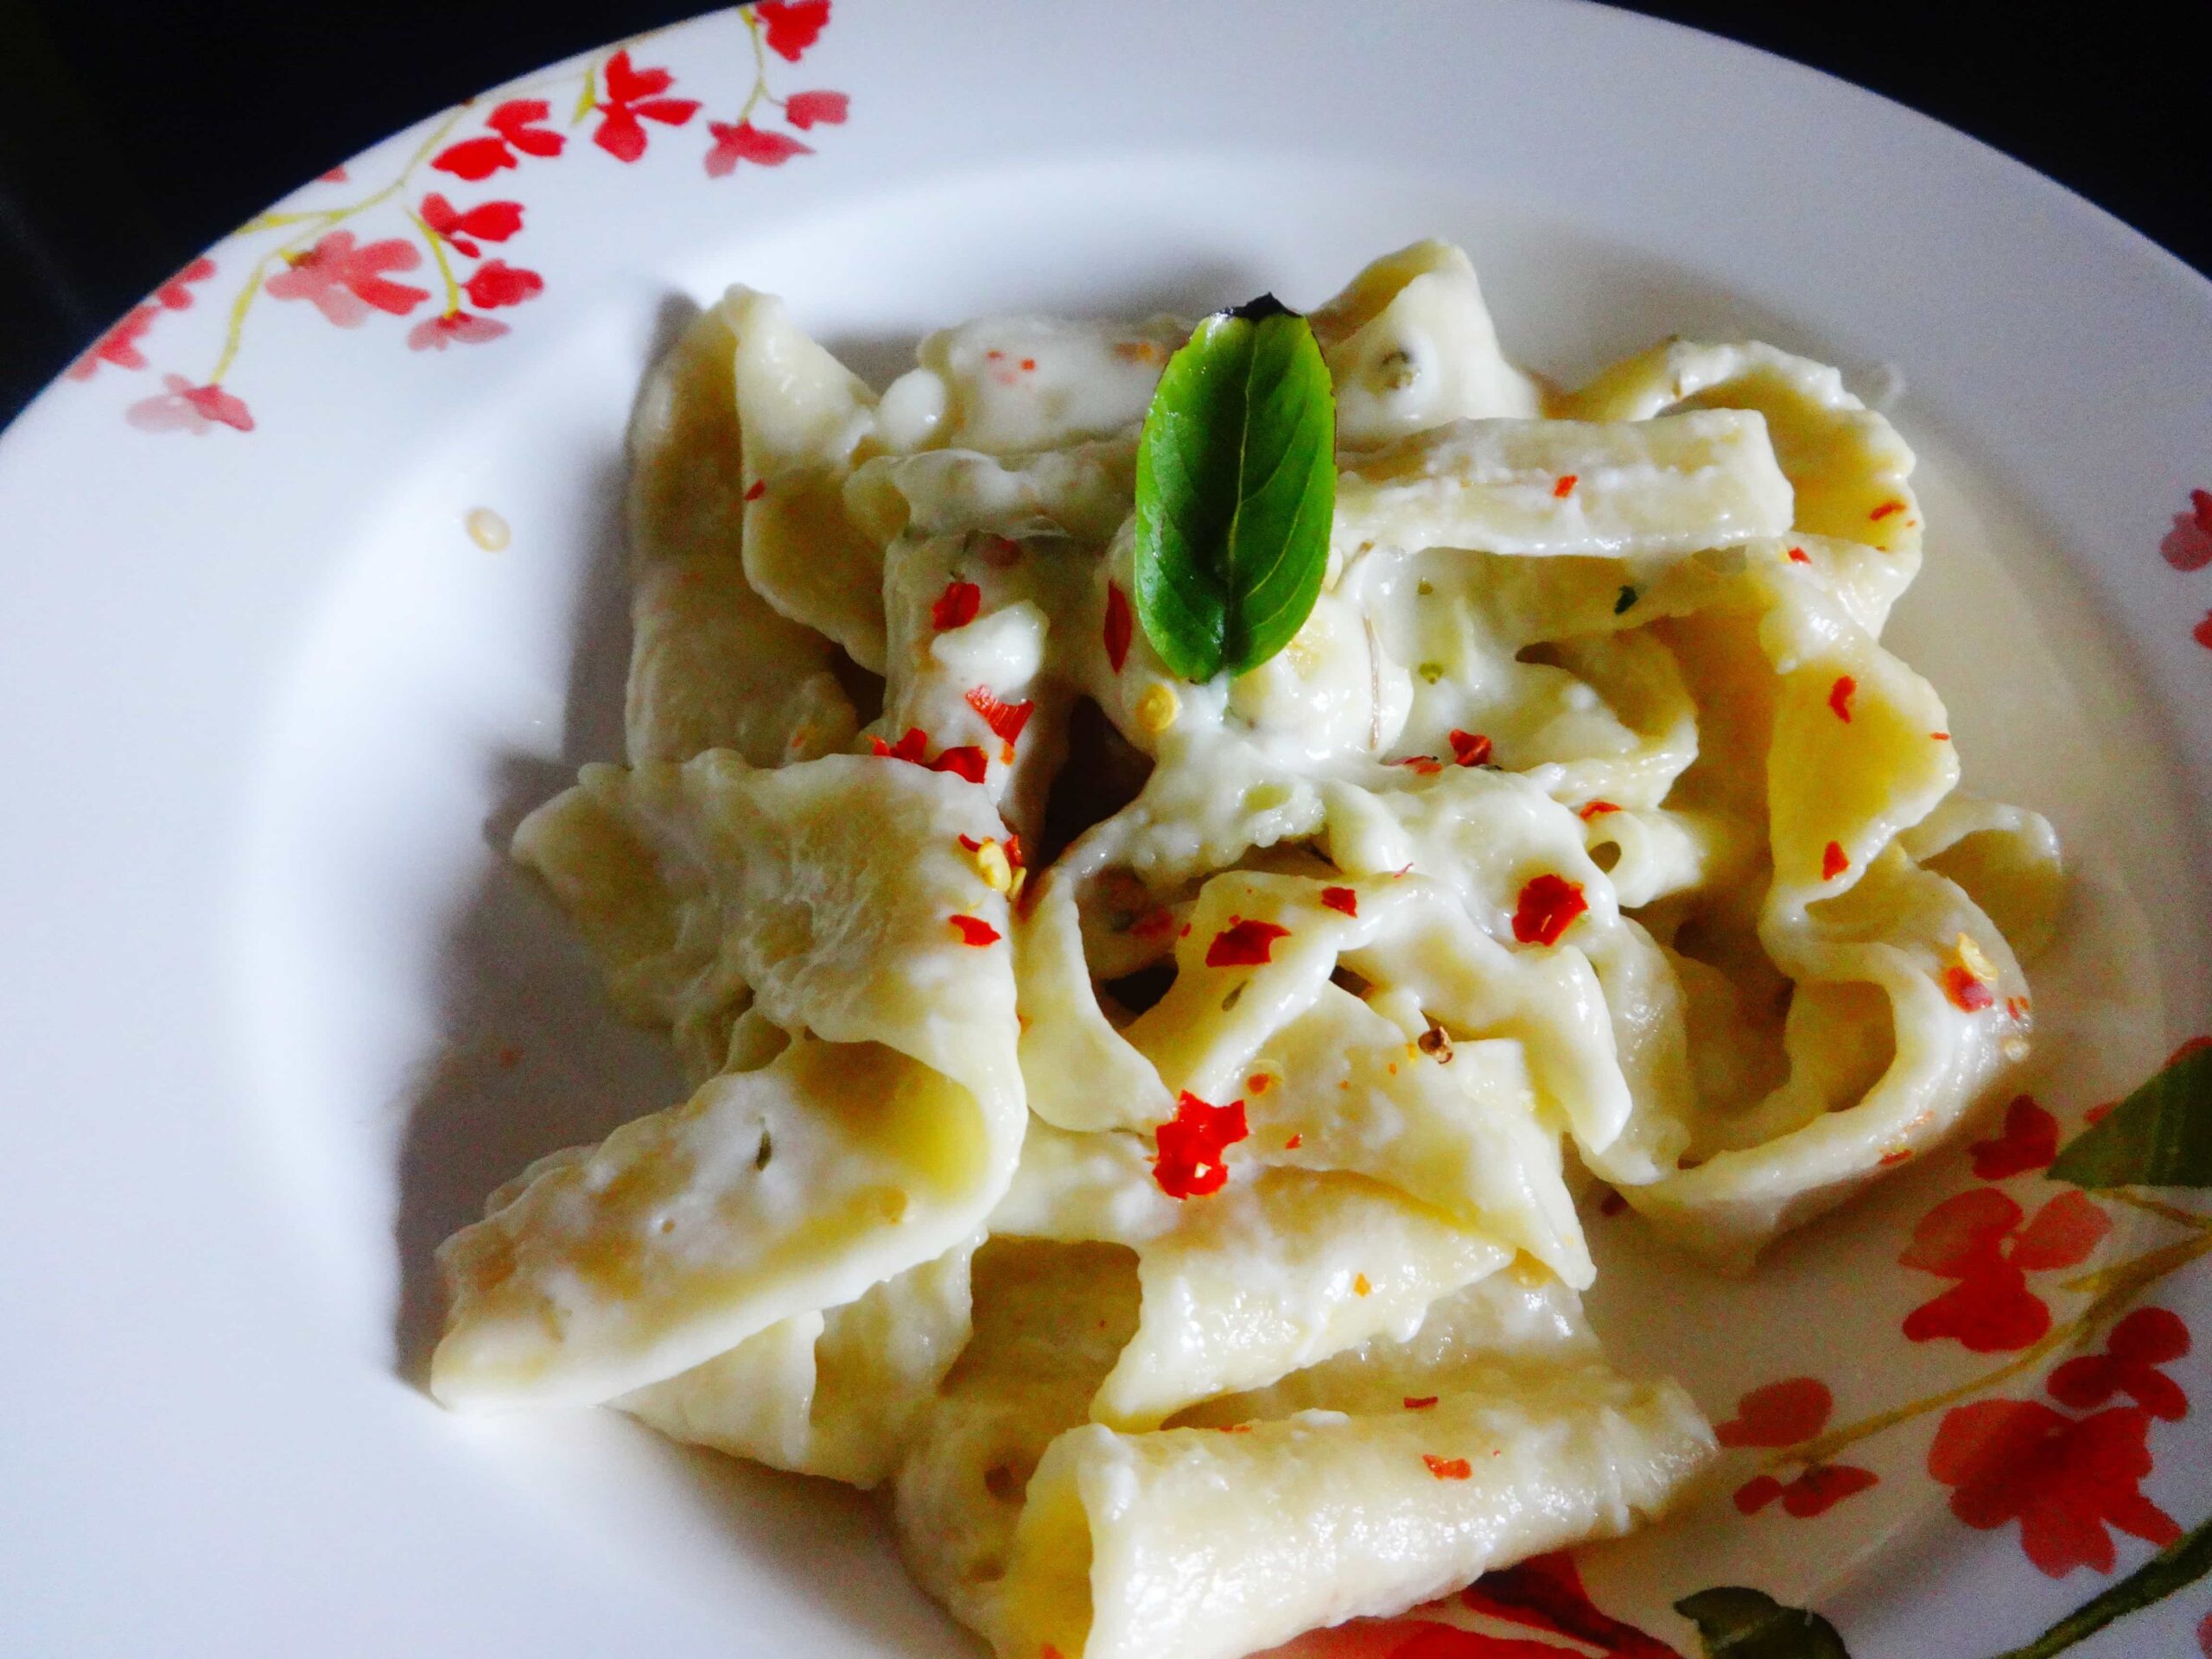 Homemade Fettuccine pasta from scratch with Bechamel sauce